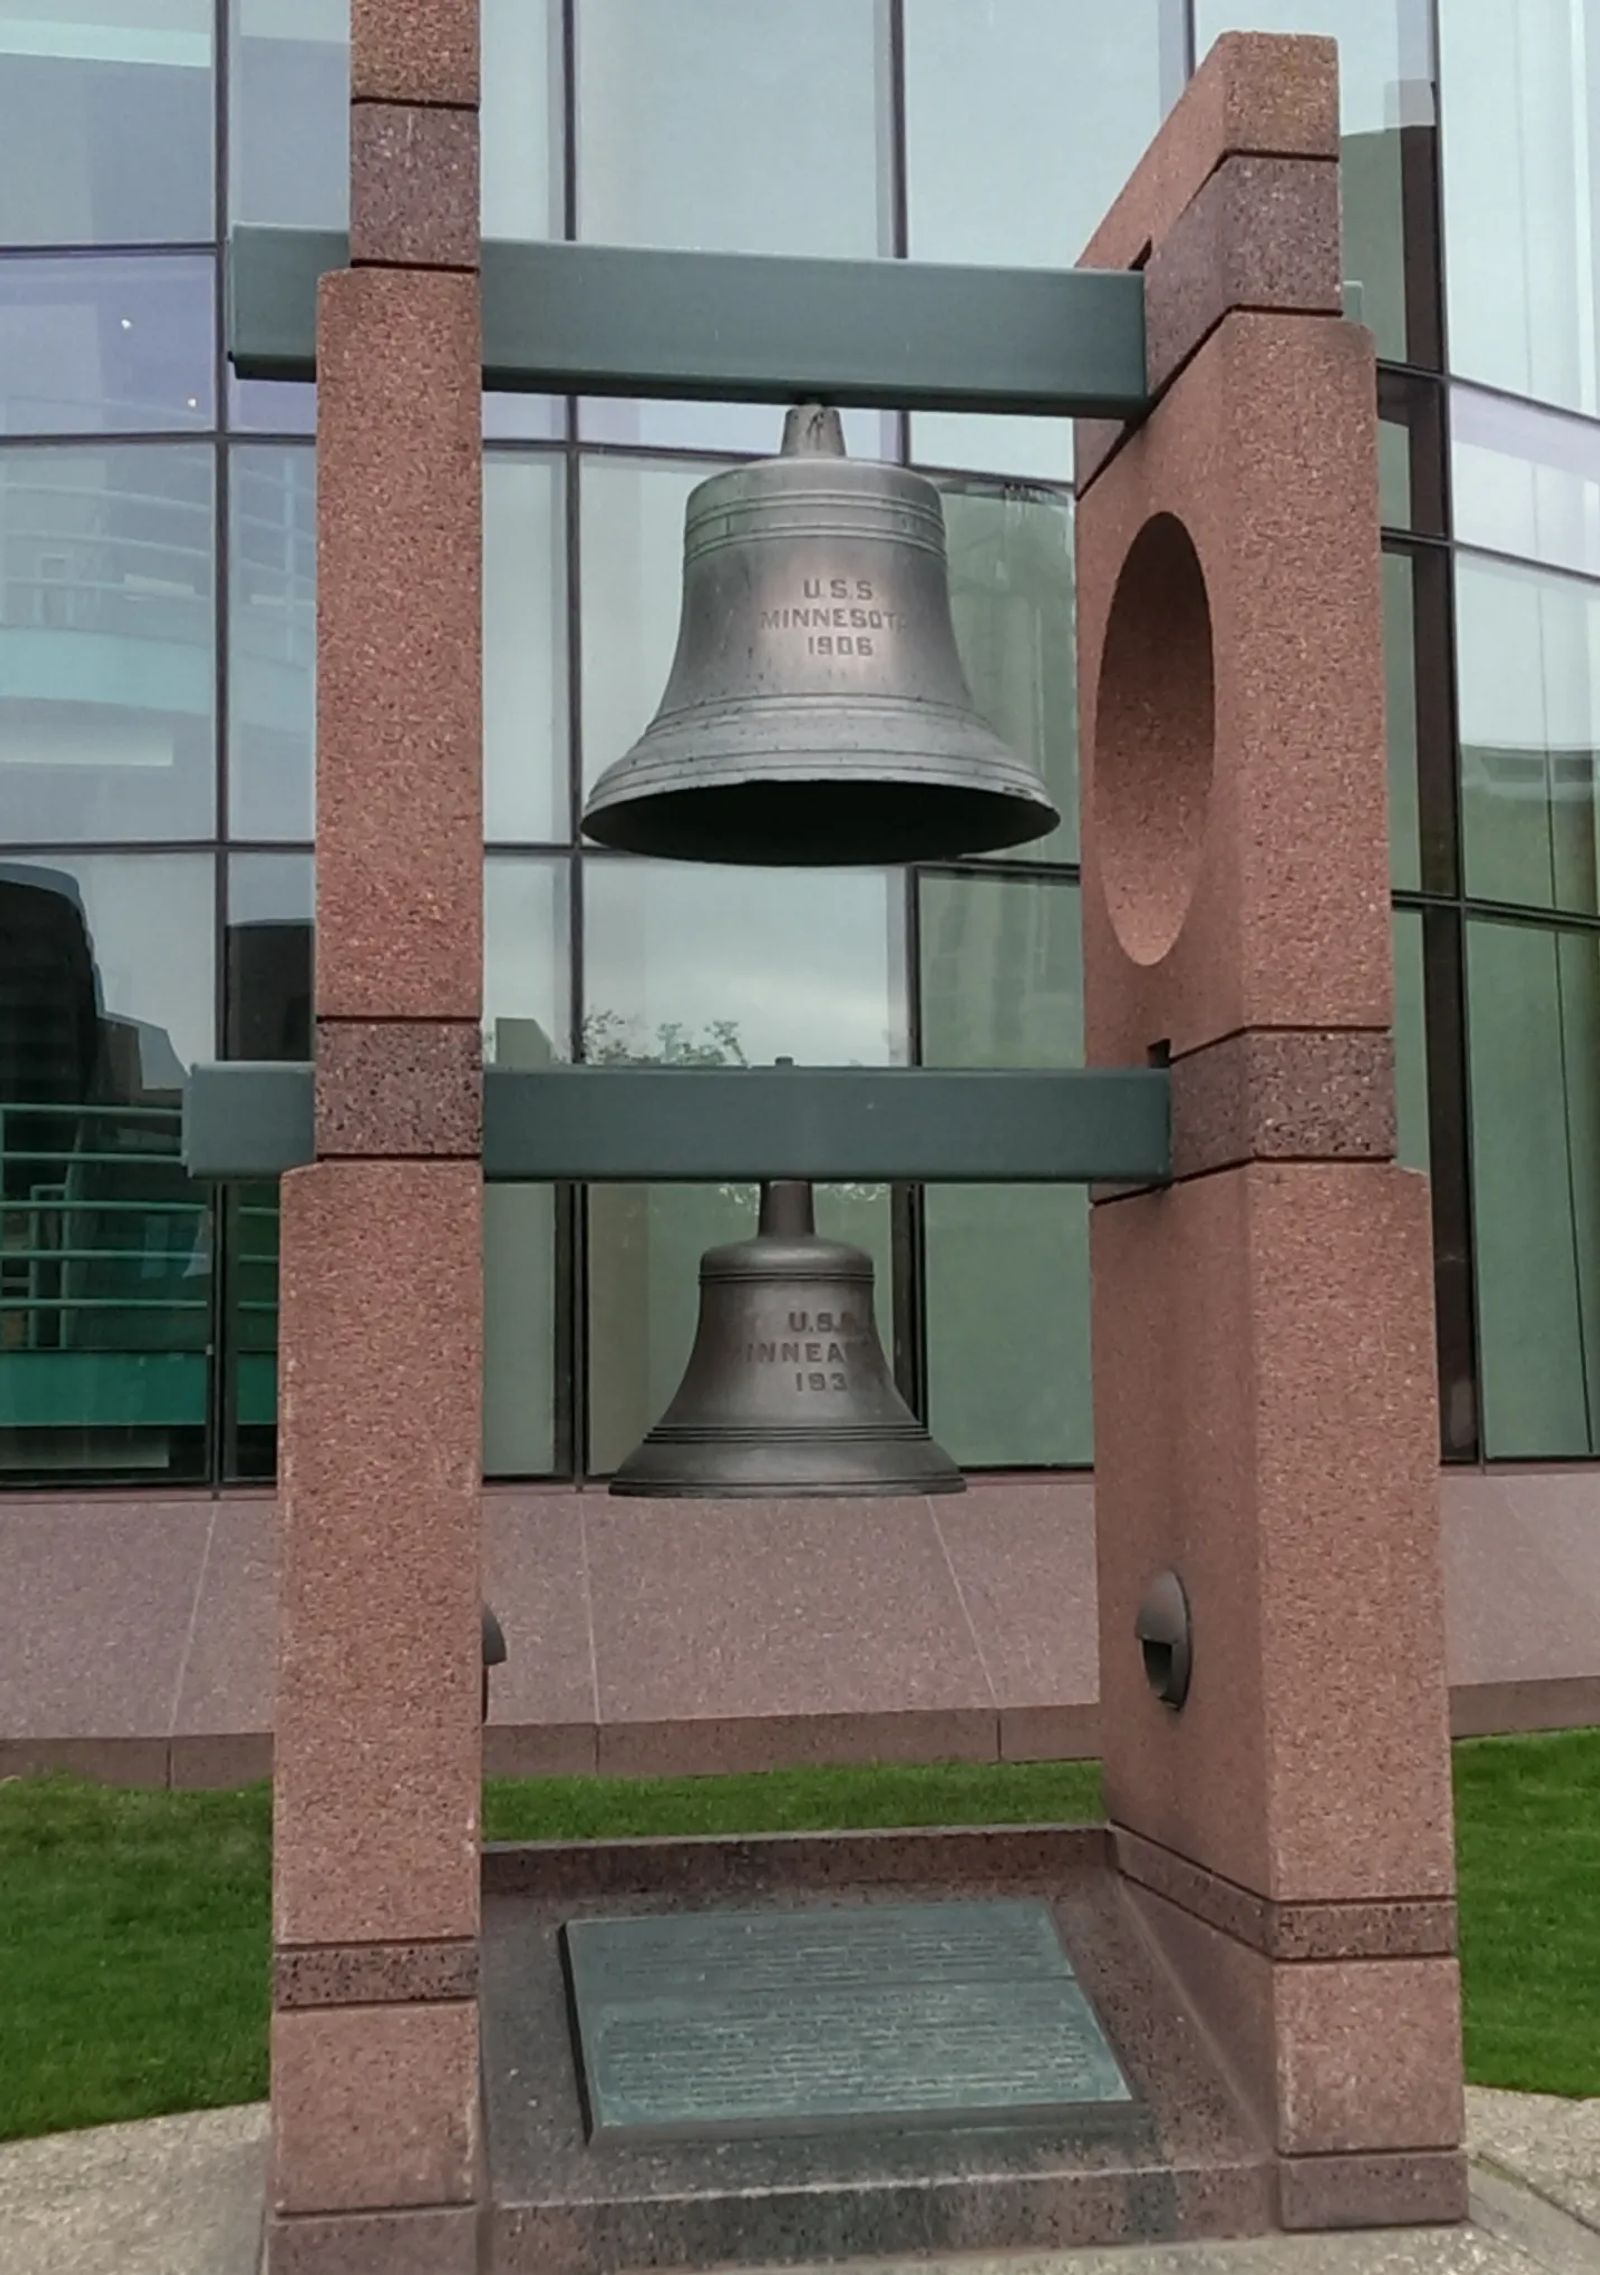 Photo of The ship's bells of the battleship USS Minnesota (WWI era) and of the cruiser USS Minneapolis (WWII era), in Minneapolis, Minnesota